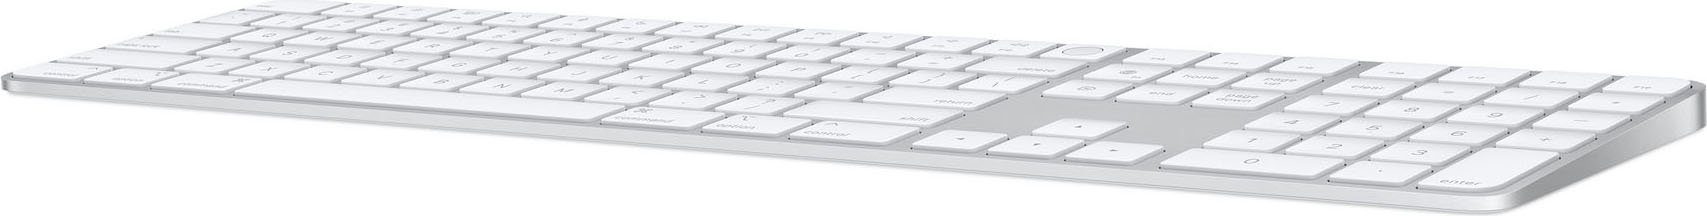 Numeric Magic and Touch ID for with Apple Keyboard Mac Apple-Tastatur Keypad